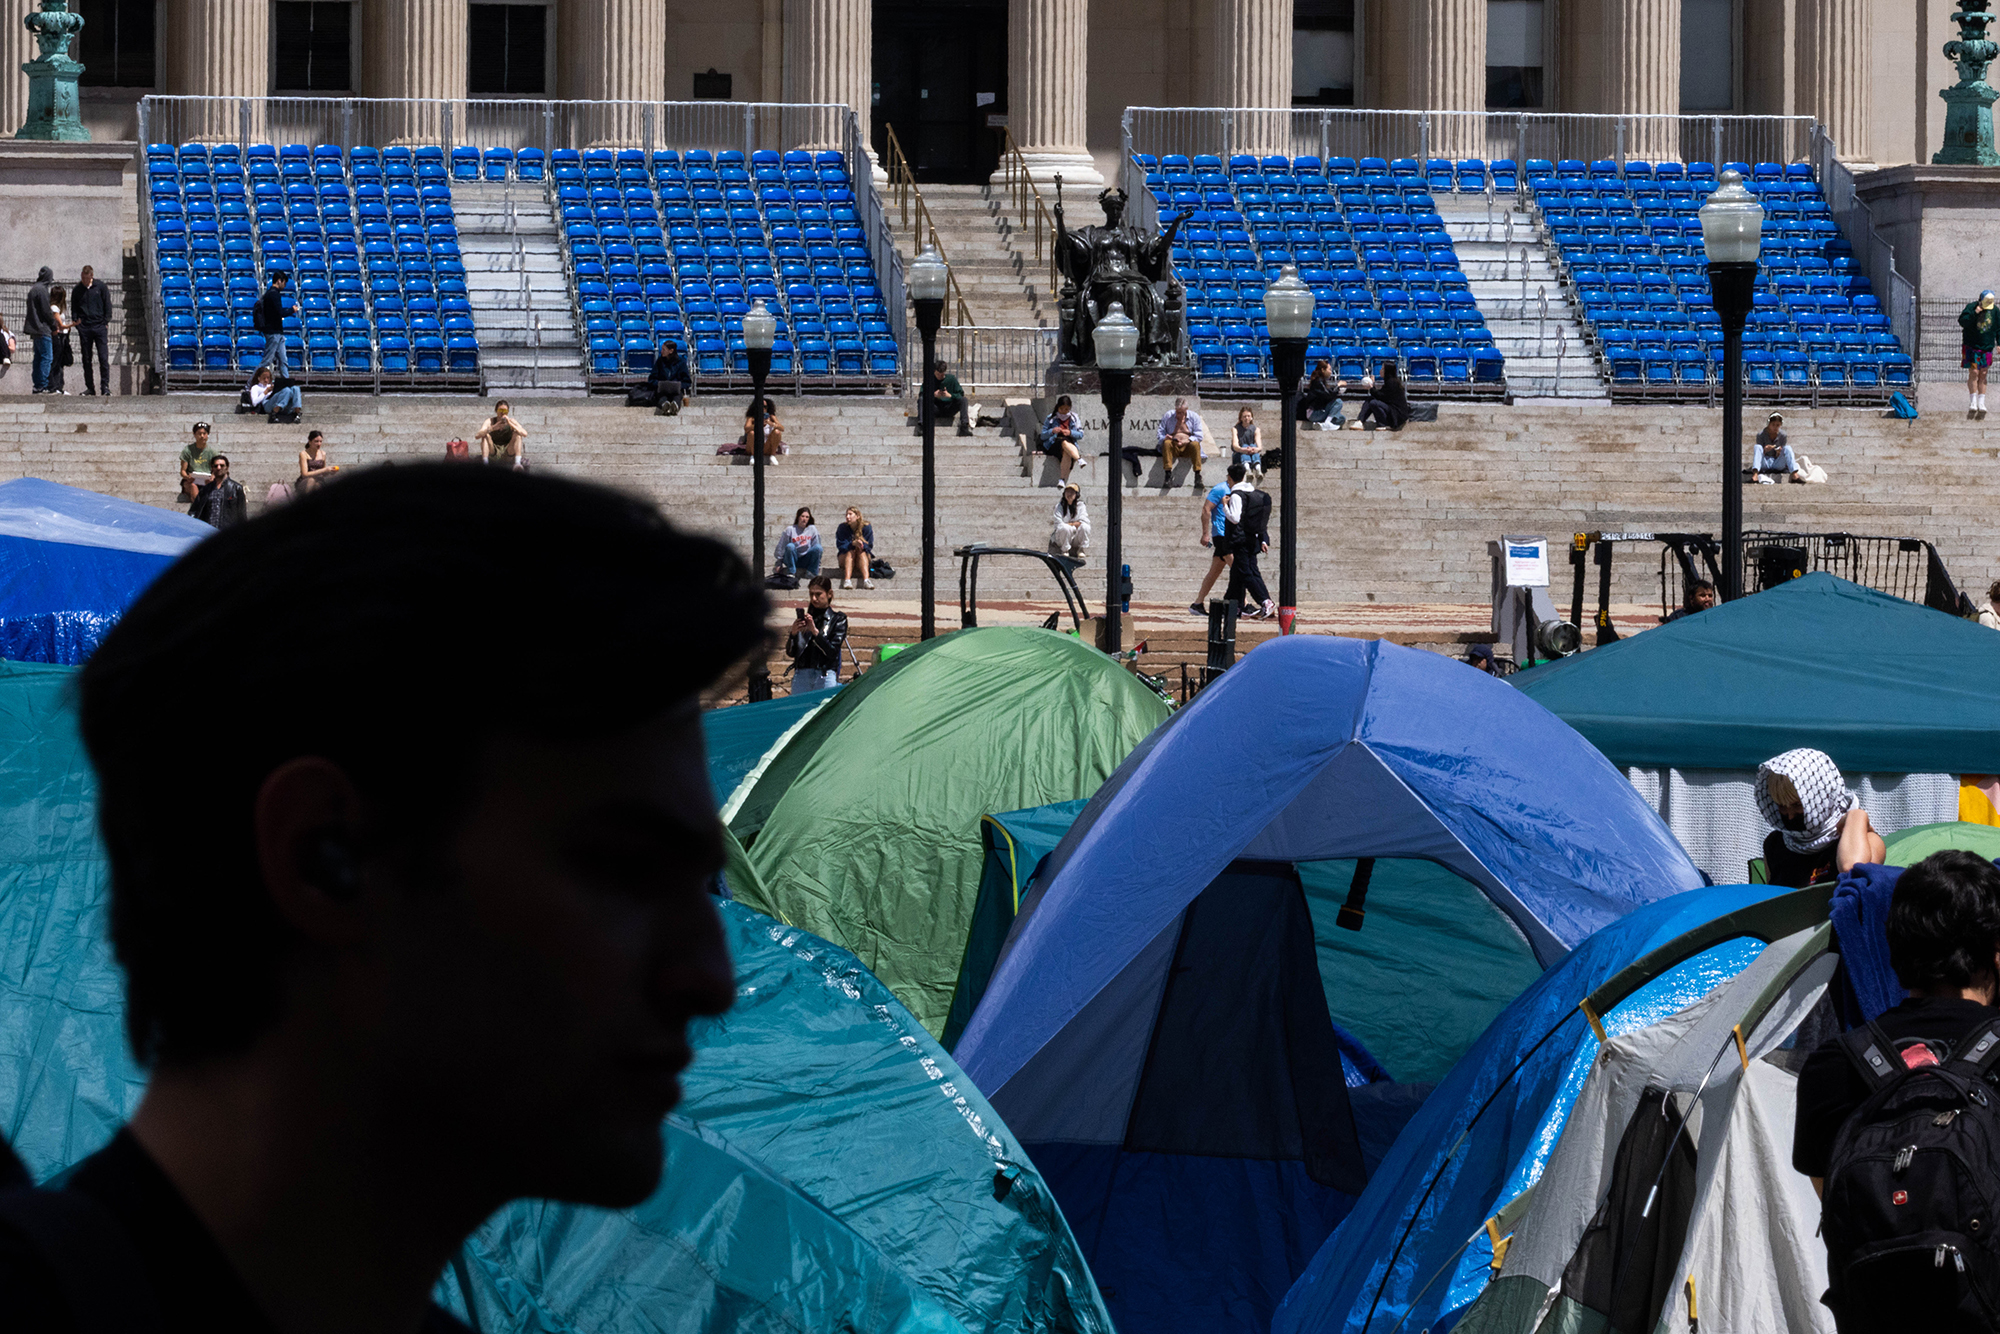 Tents set up by demonstrators are seen today on the Columbia campus against the backdrop of the university's preparation for graduation ceremonies.